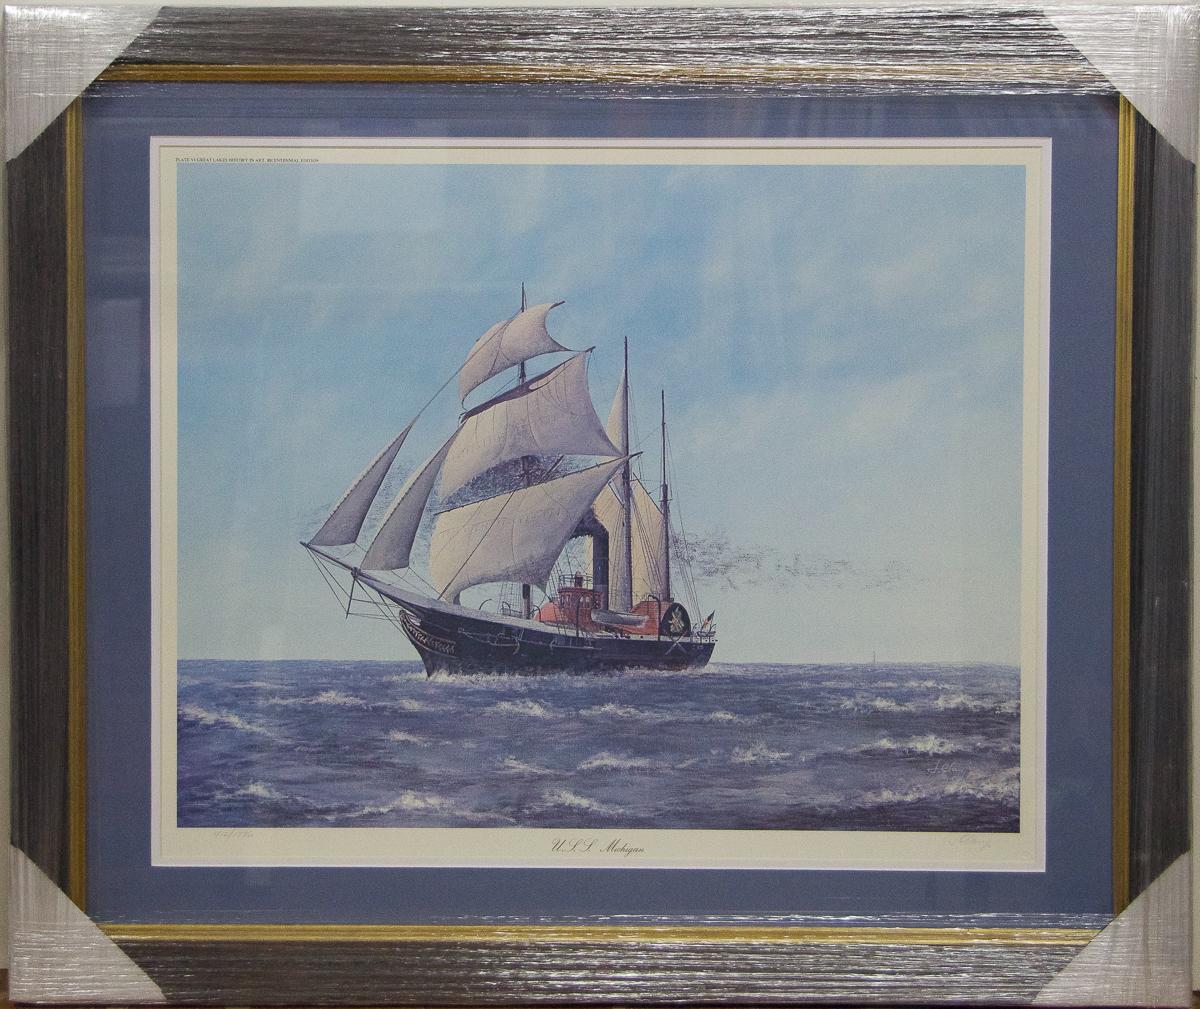 Jim Clary  Landscape Print - "U.S.S. Michigan" by Jim Clary. Limited Edition Lithograph: 417/1776, Signed. 